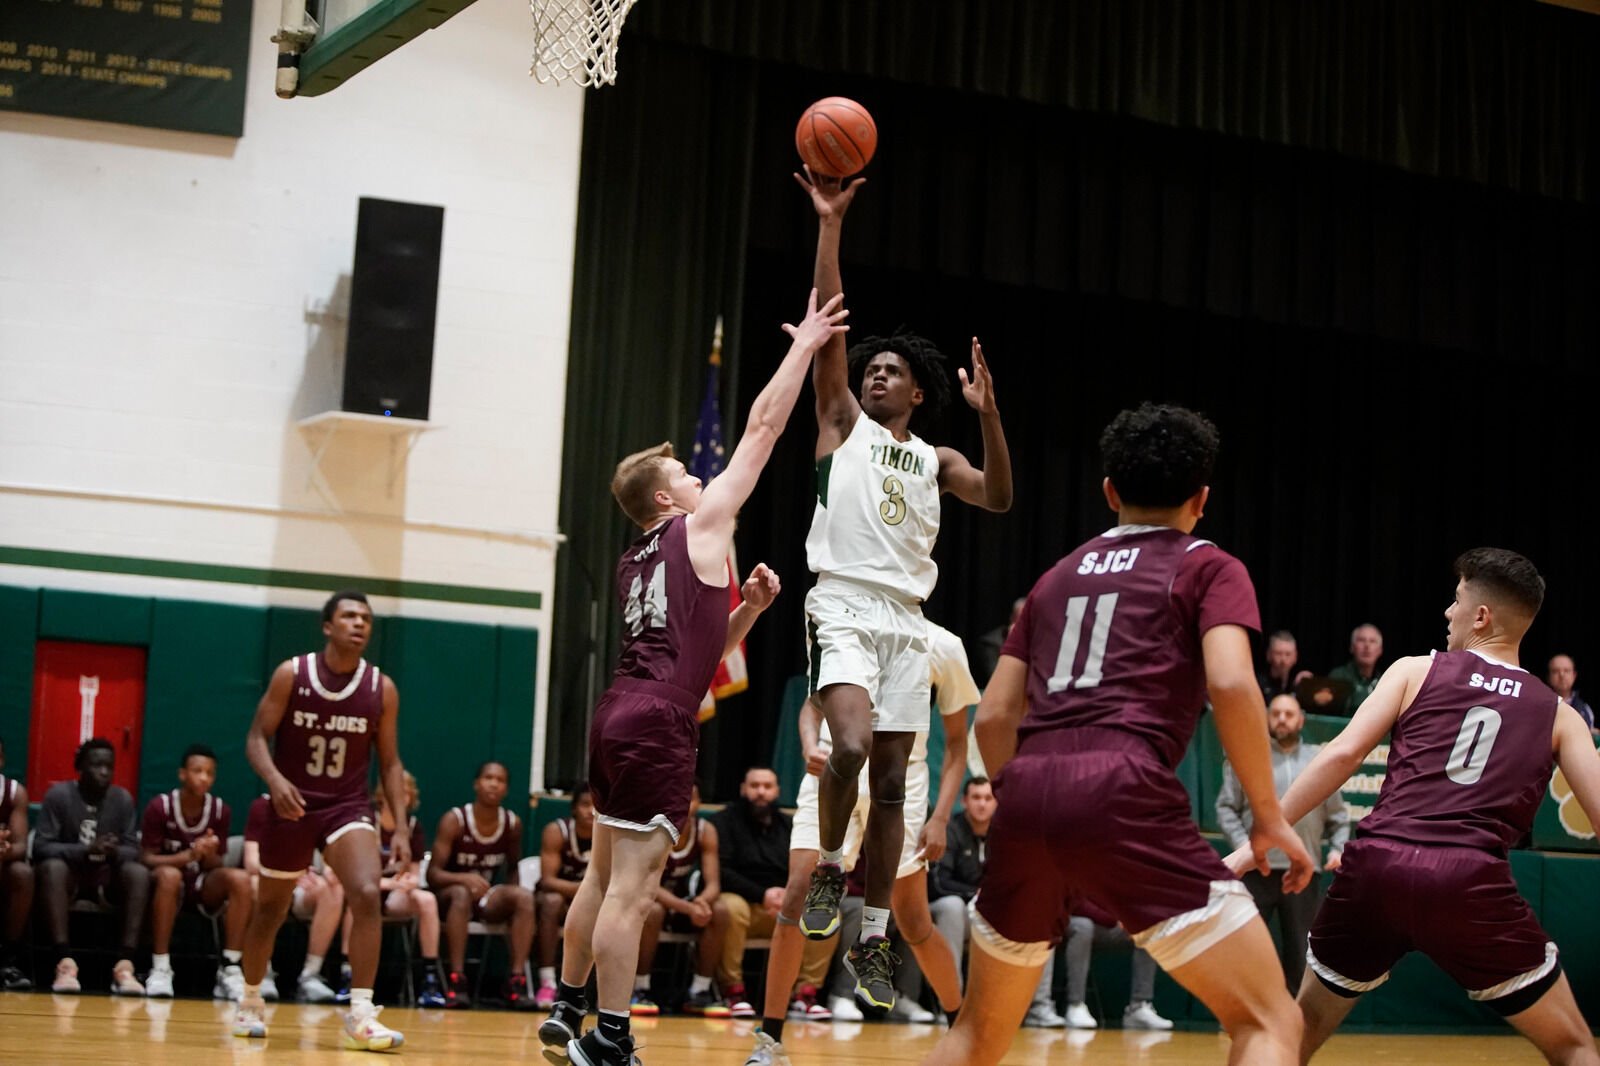 Boys basketball polls: Amherst remains on top in large schools; Bishop Timon still unanimous No. 1 in smalls